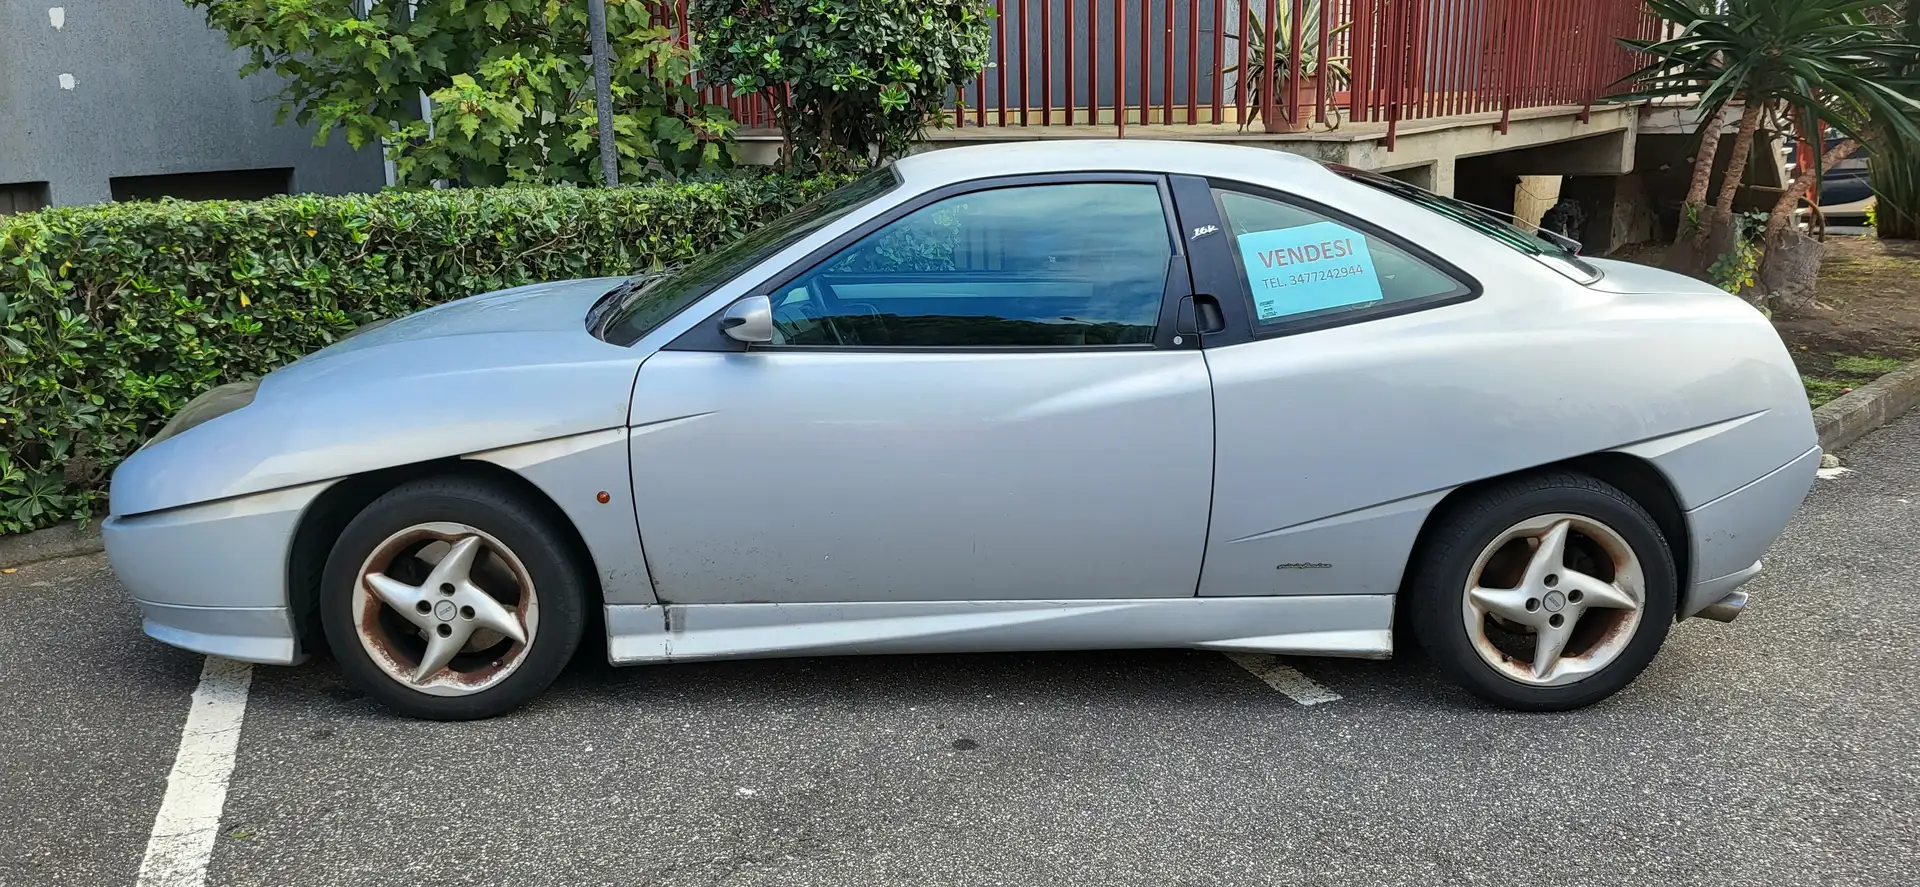 Fiat Coupe Coupe 1.8 16v siva - 2